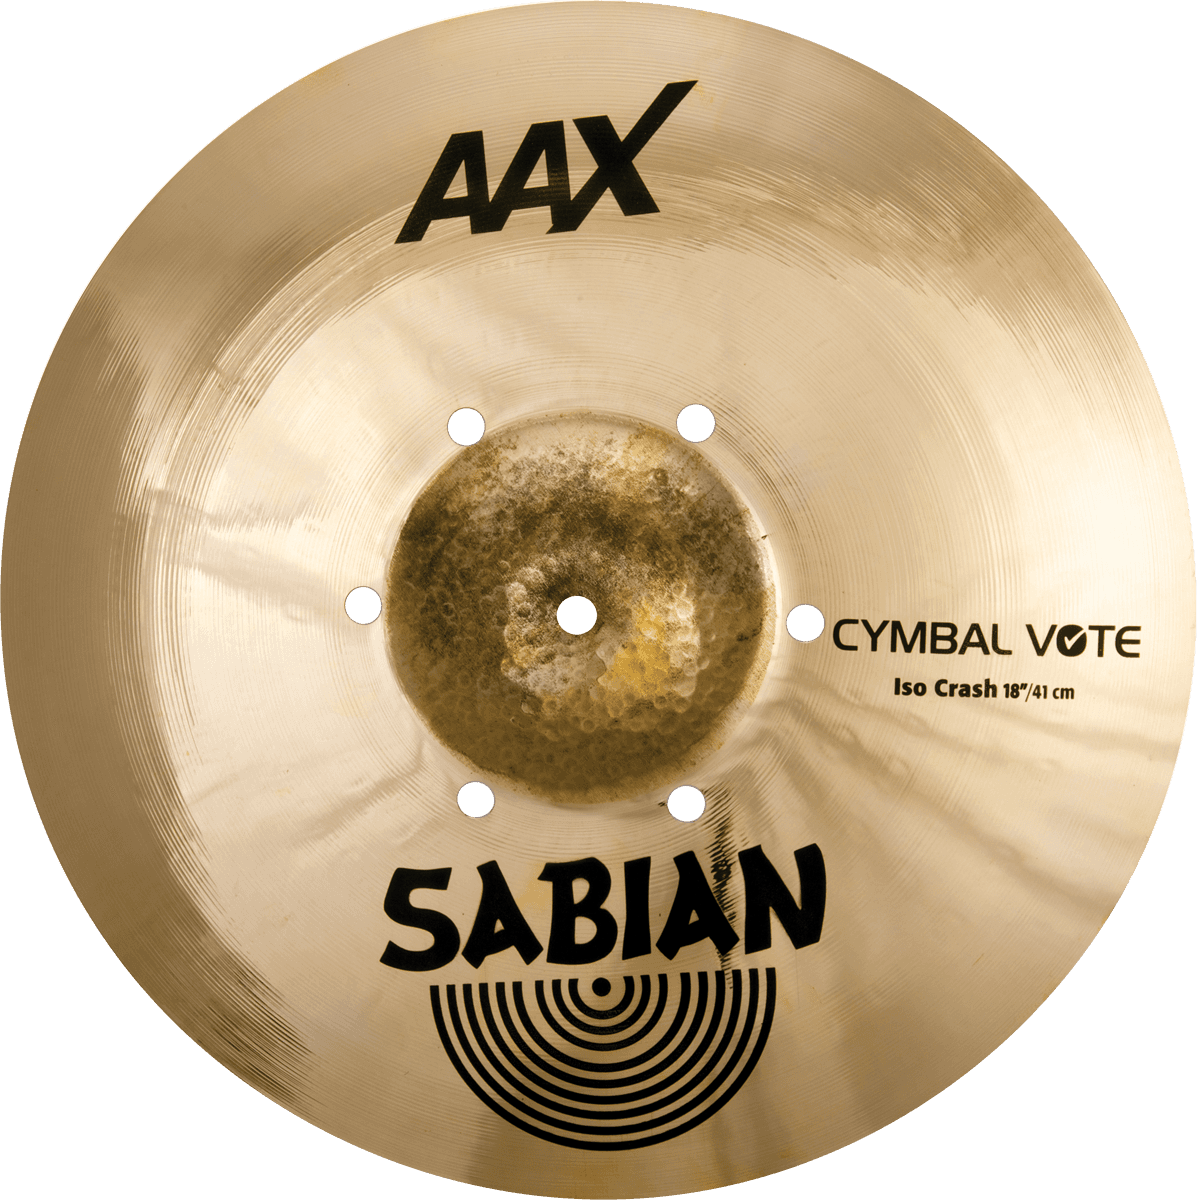 Sabian Aax   Cymbale Vote Iso Crash 18 - 18 Pouces - Crash cymbal - Main picture